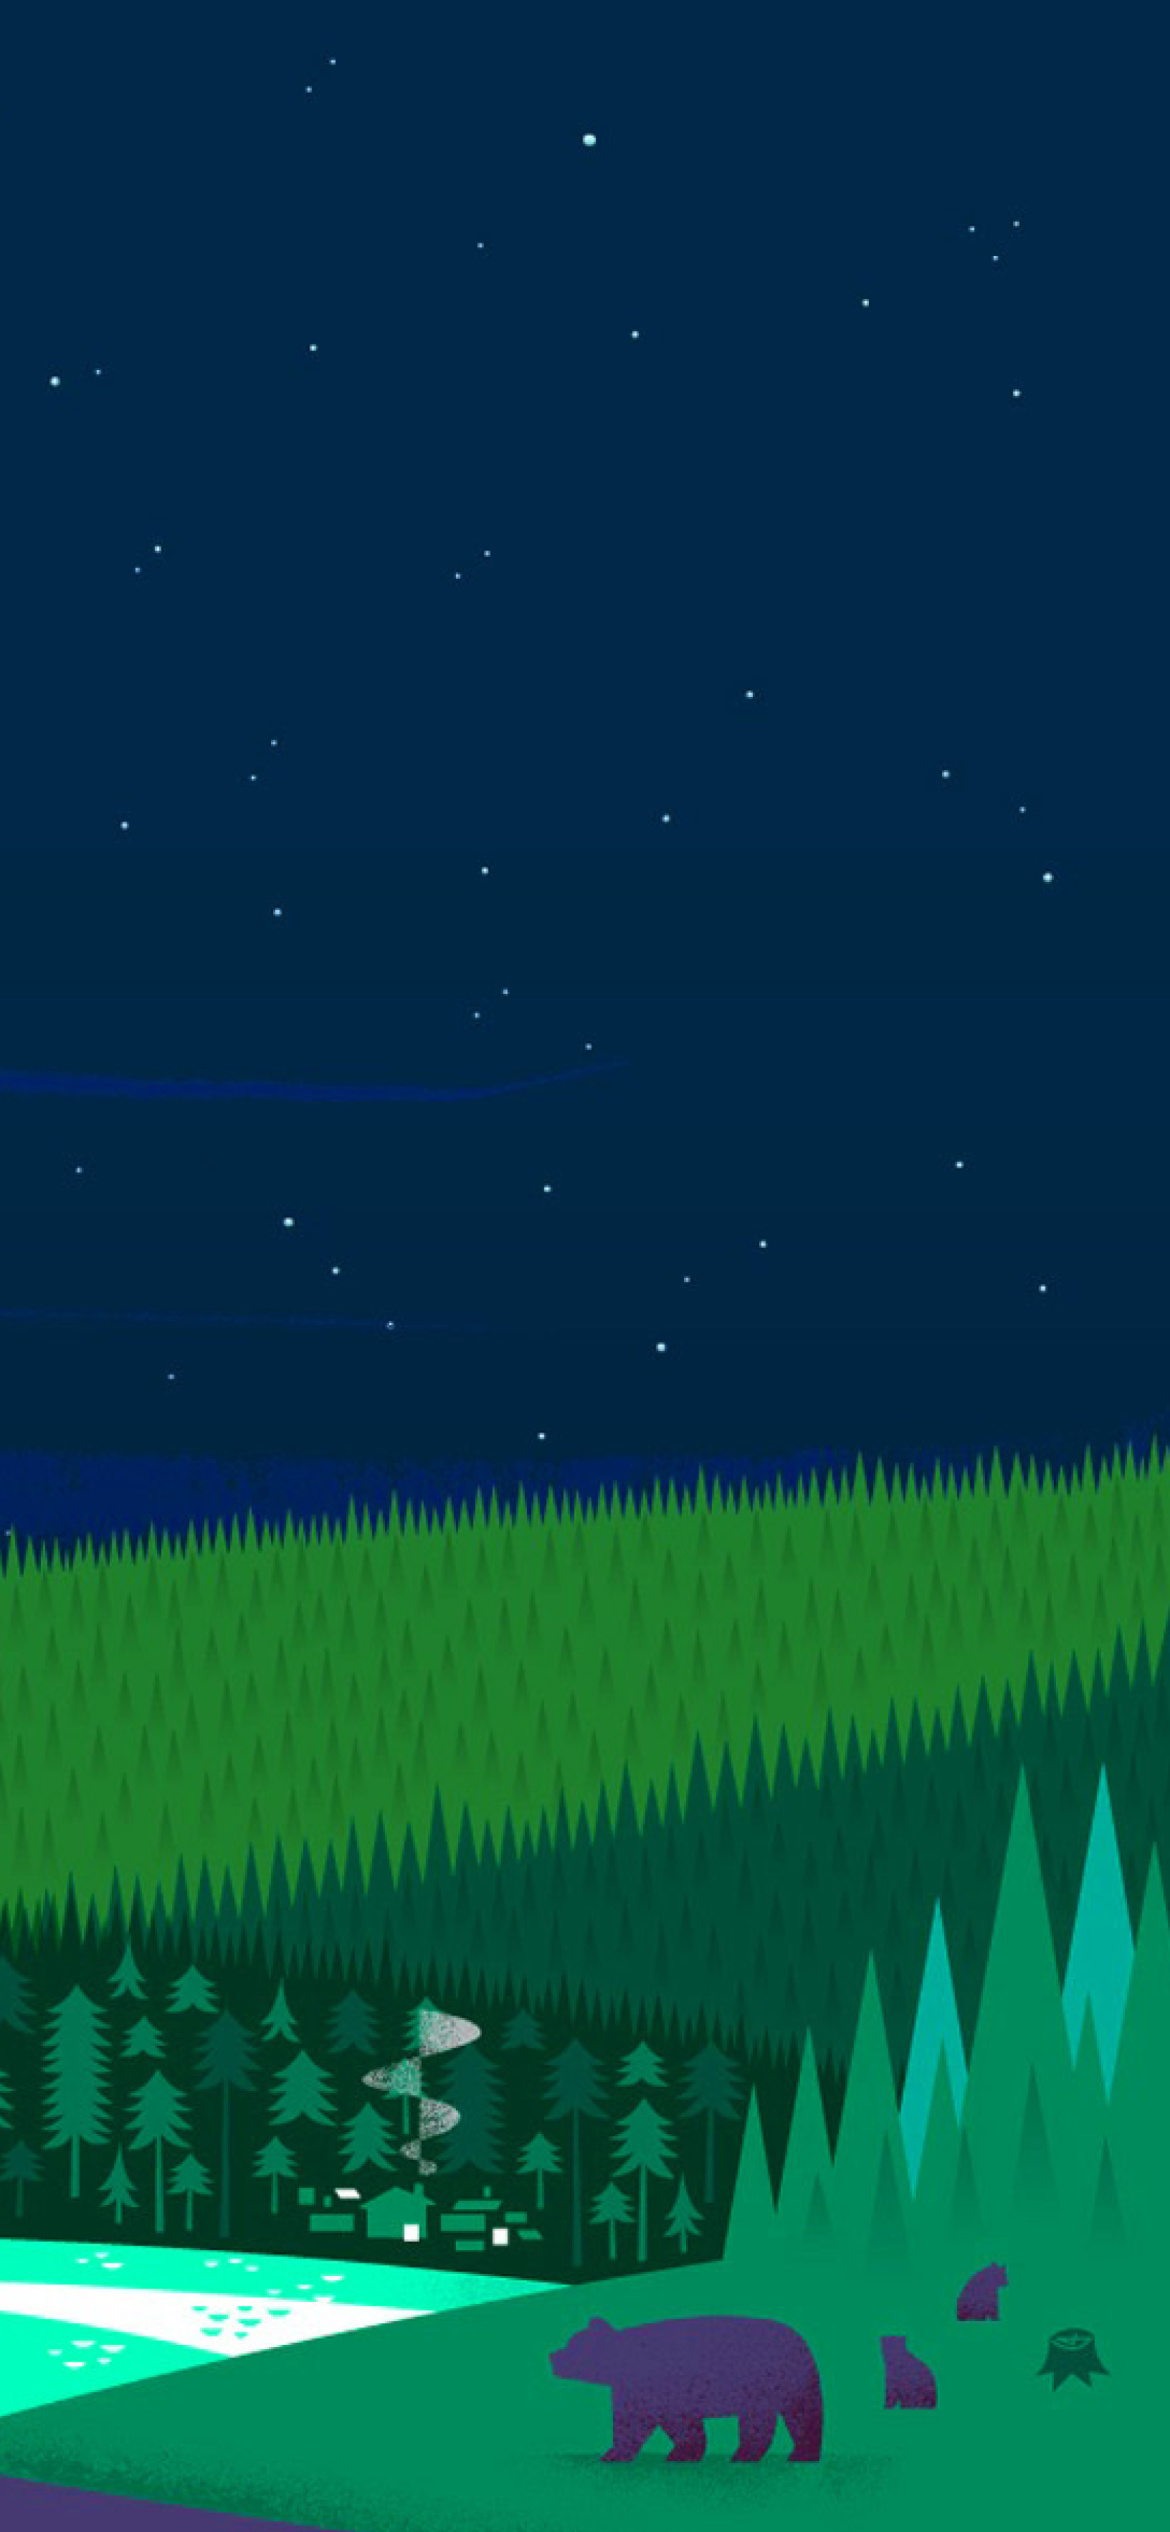 Graphics night and bears in forest wallpaper 1170x2532